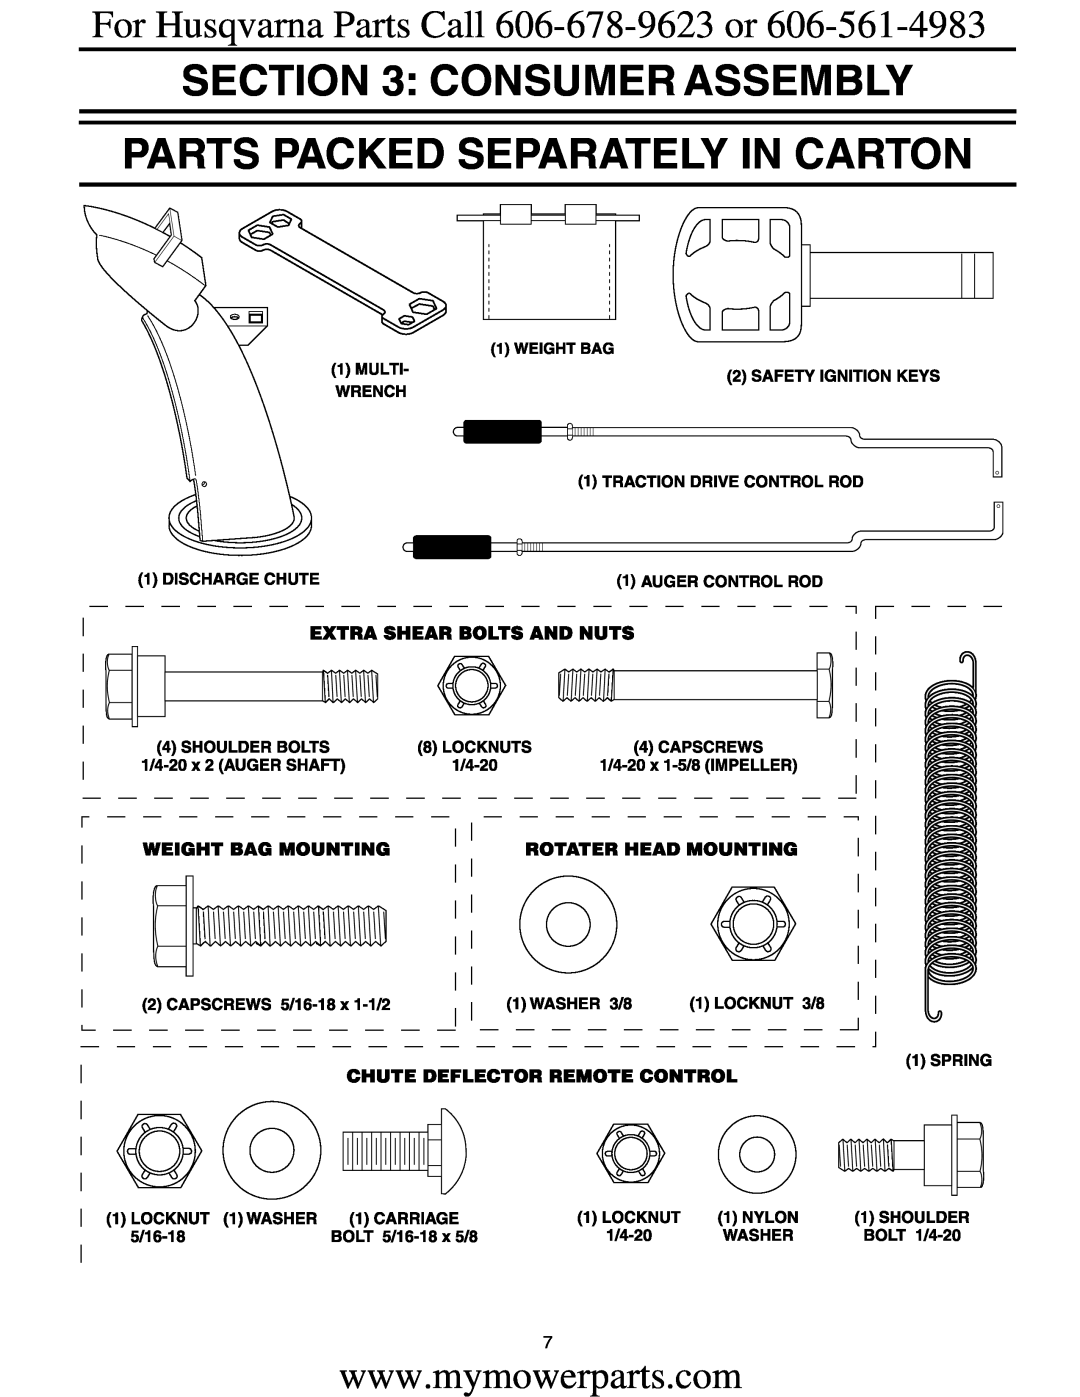 Electrolux OHV service manual Consumer Assembly Parts Packed Separately In Carton, For Husqvarna Parts Call 606-678-9623 or 